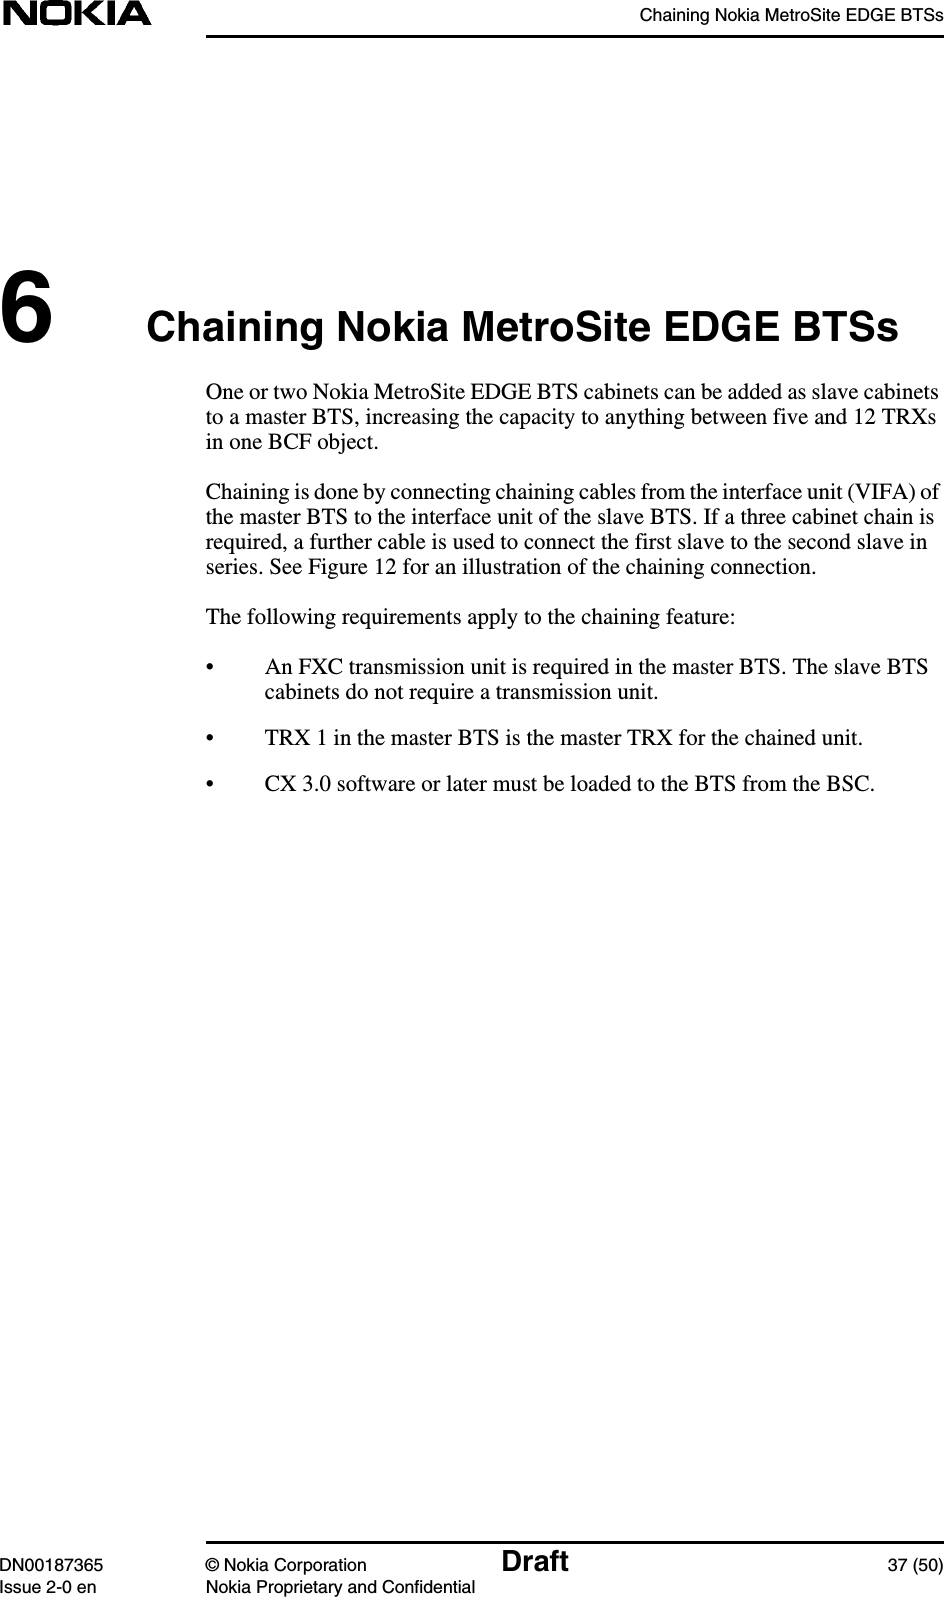 Chaining Nokia MetroSite EDGE BTSsDN00187365 © Nokia Corporation Draft 37 (50)Issue 2-0 en Nokia Proprietary and Confidential6Chaining Nokia MetroSite EDGE BTSsOne or two Nokia MetroSite EDGE BTS cabinets can be added as slave cabinetsto a master BTS, increasing the capacity to anything between five and 12 TRXsin one BCF object.Chaining is done by connecting chaining cables from the interface unit (VIFA) ofthe master BTS to the interface unit of the slave BTS. If a three cabinet chain isrequired, a further cable is used to connect the first slave to the second slave inseries. See Figure 12 for an illustration of the chaining connection.The following requirements apply to the chaining feature:• An FXC transmission unit is required in the master BTS. The slave BTScabinets do not require a transmission unit.• TRX 1 in the master BTS is the master TRX for the chained unit.• CX 3.0 software or later must be loaded to the BTS from the BSC.